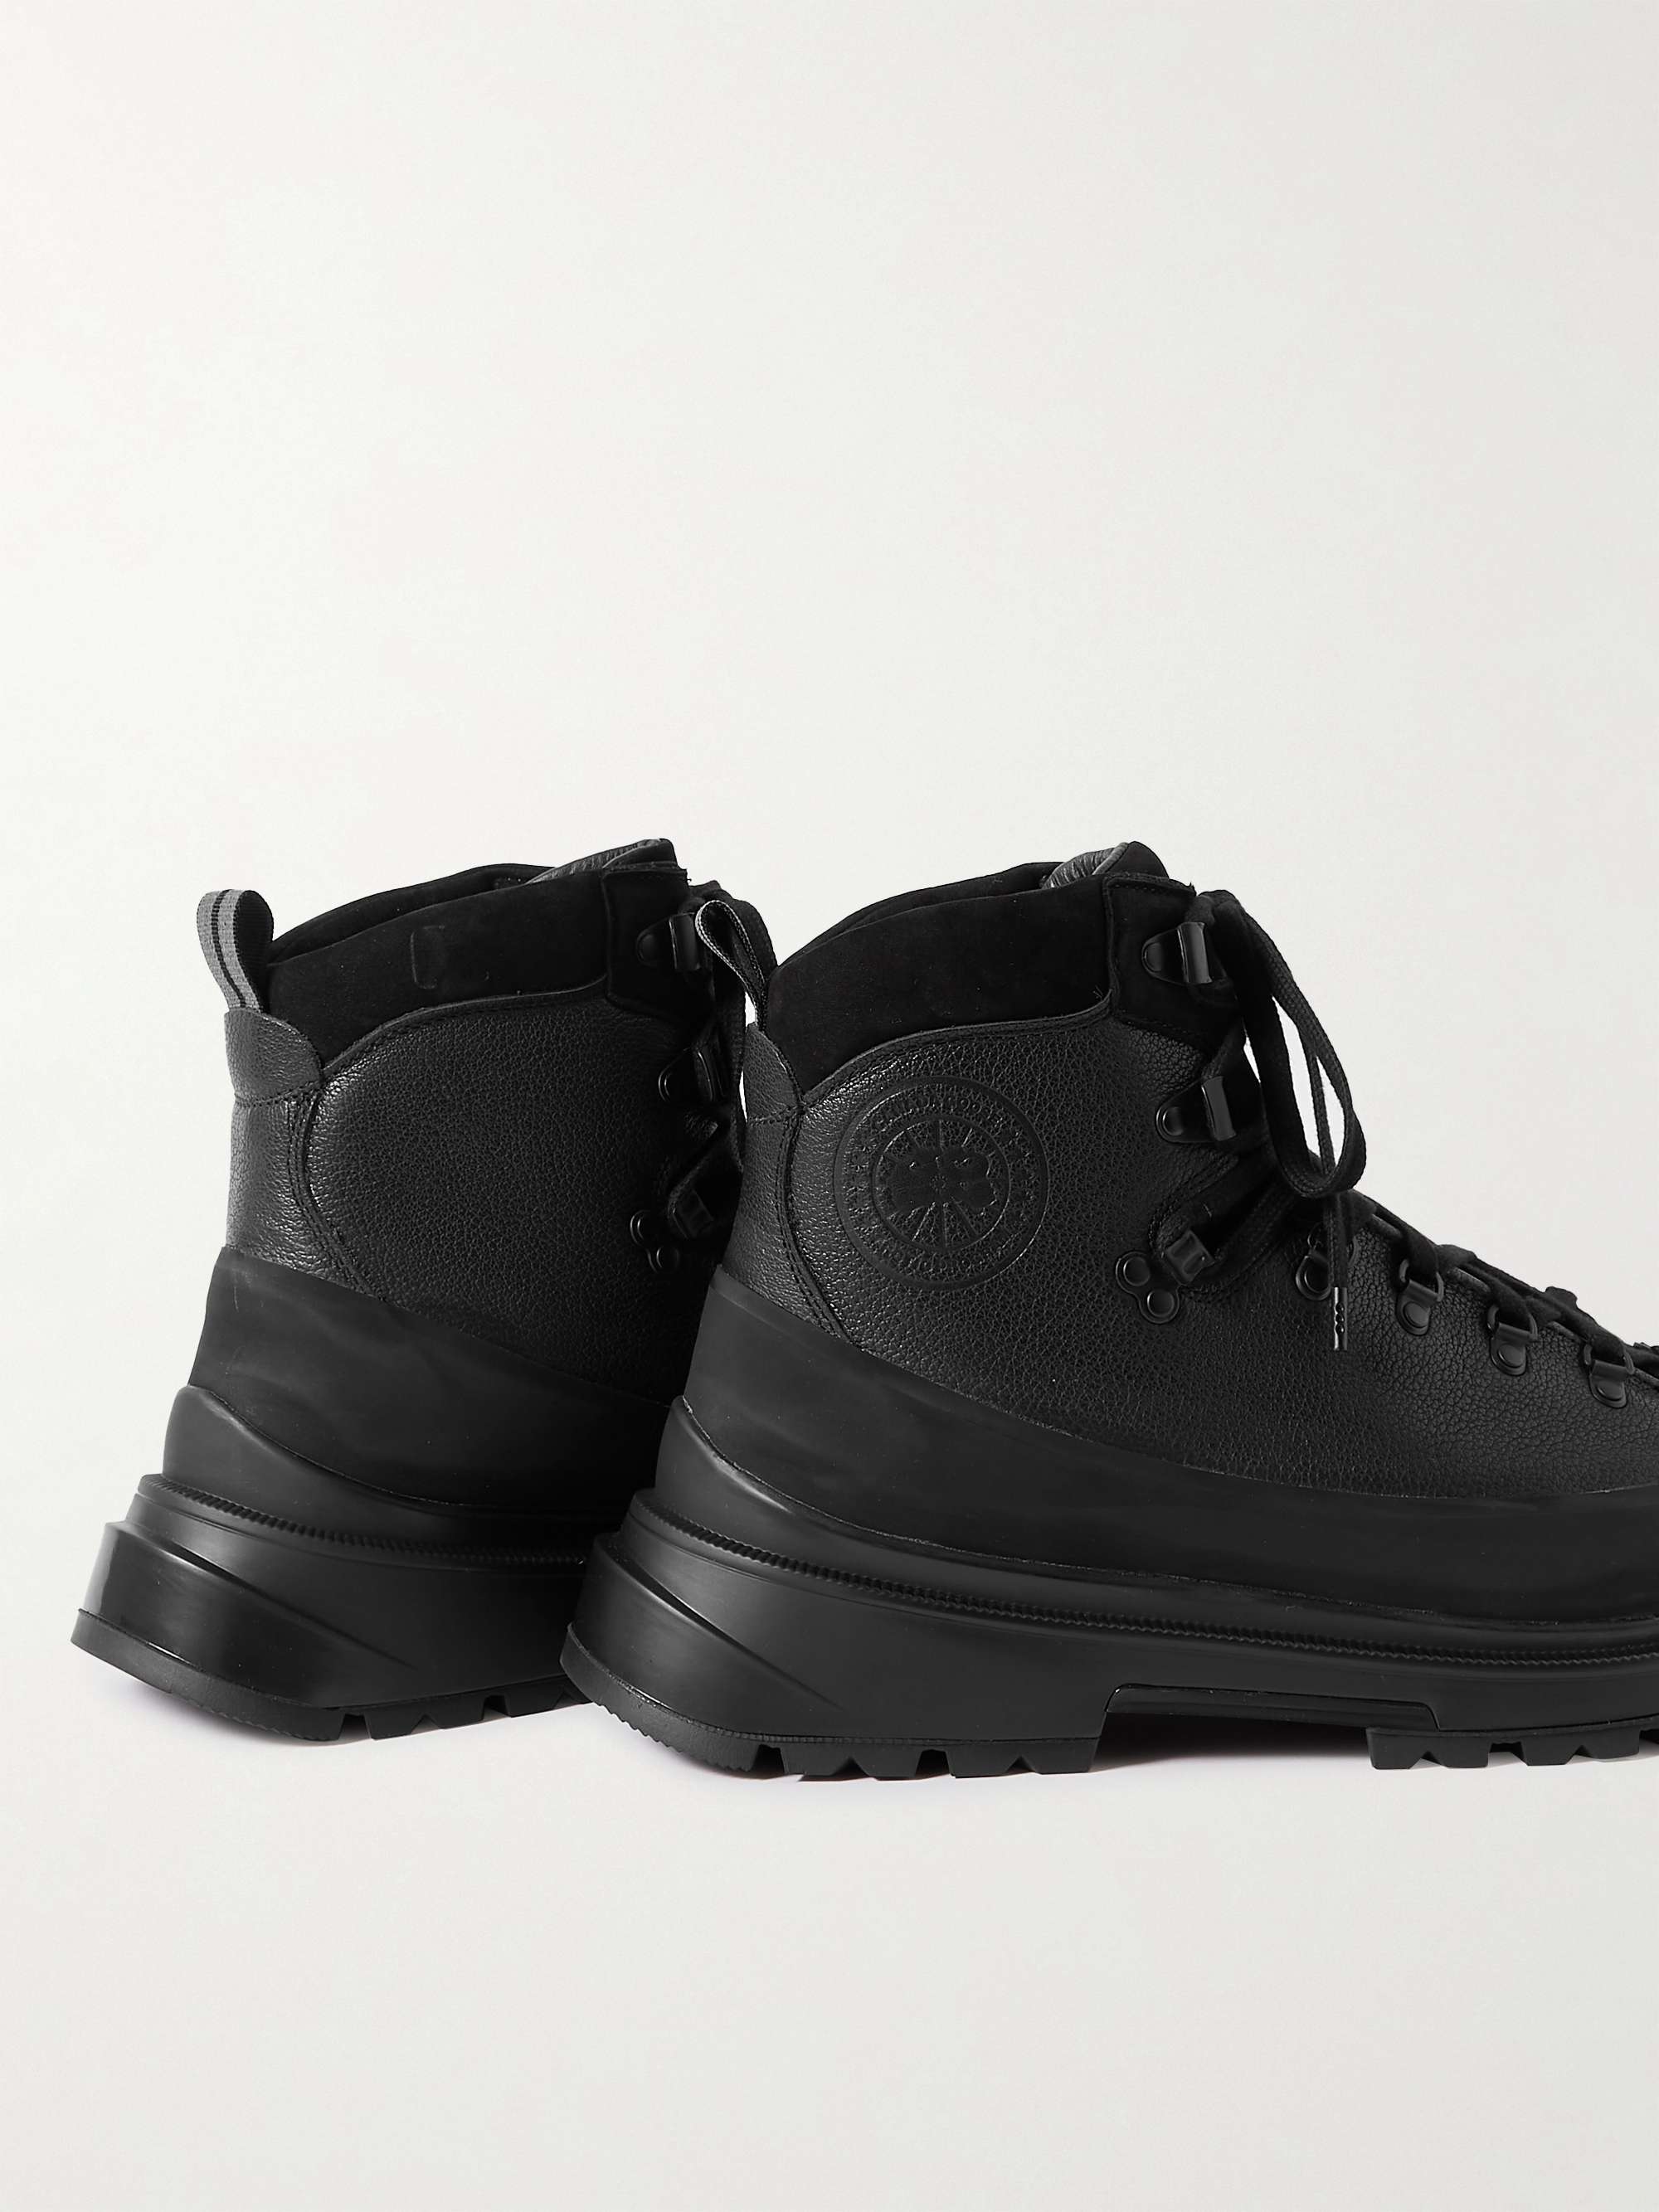 CANADA GOOSE Journey Rubber and Nubuck-Trimmed Full-Grain Leather Hiking Boots